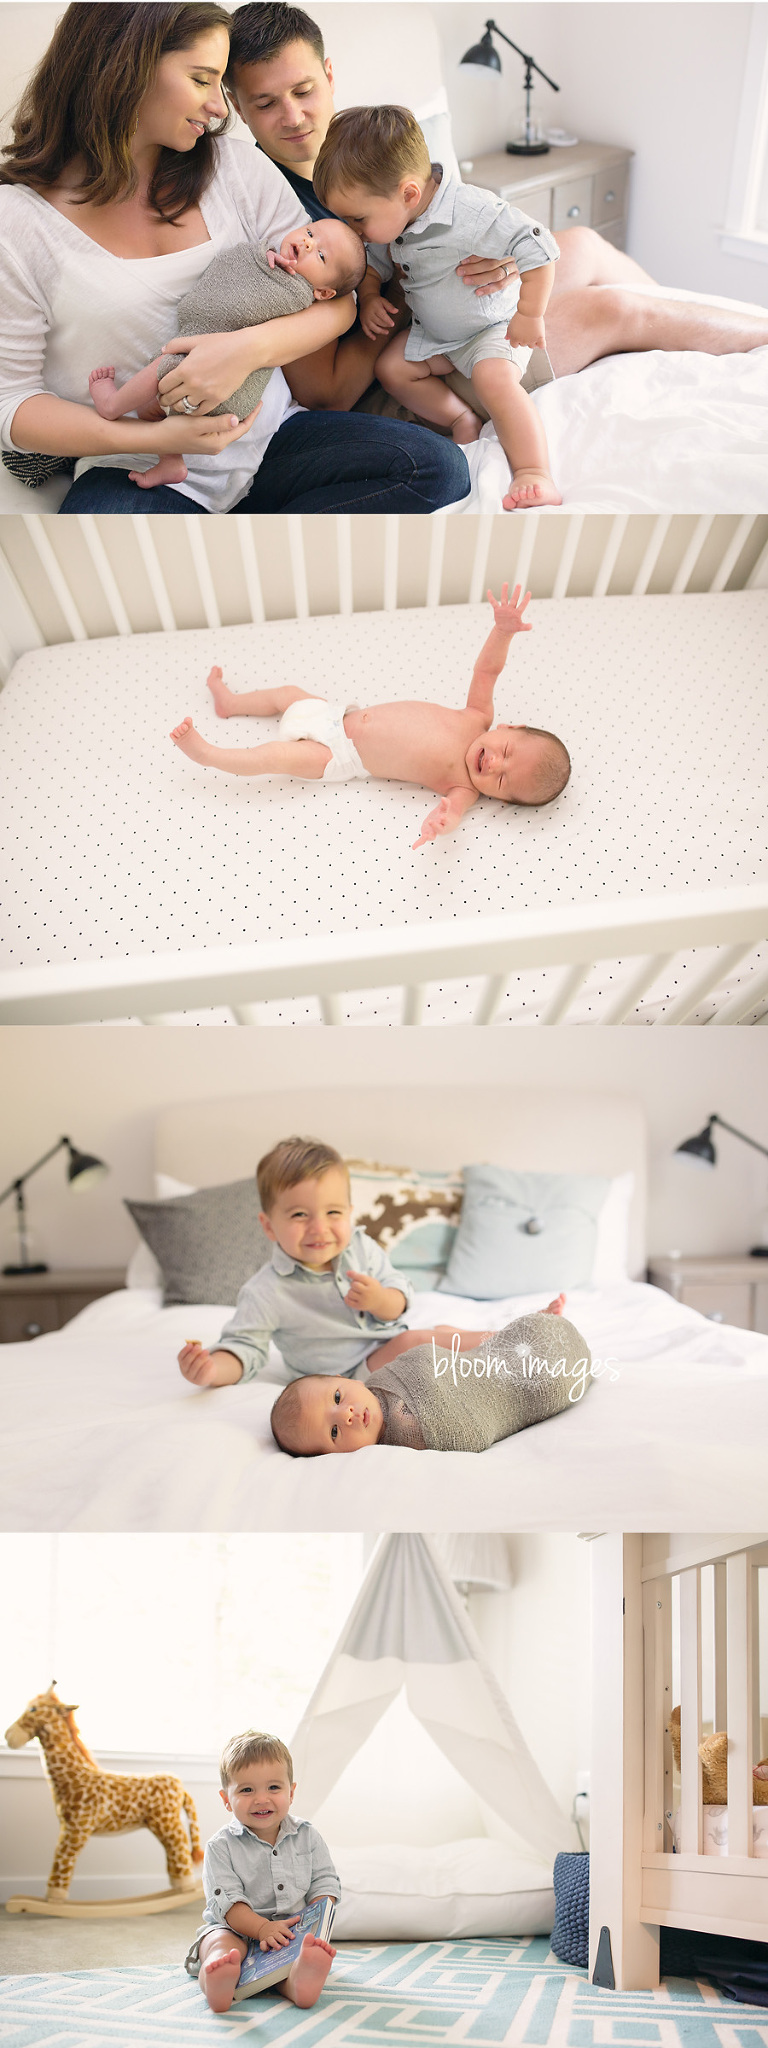 At home infant photos Reston VA by Bloom Images Lifestyle Newborn Photographer in Northern VA